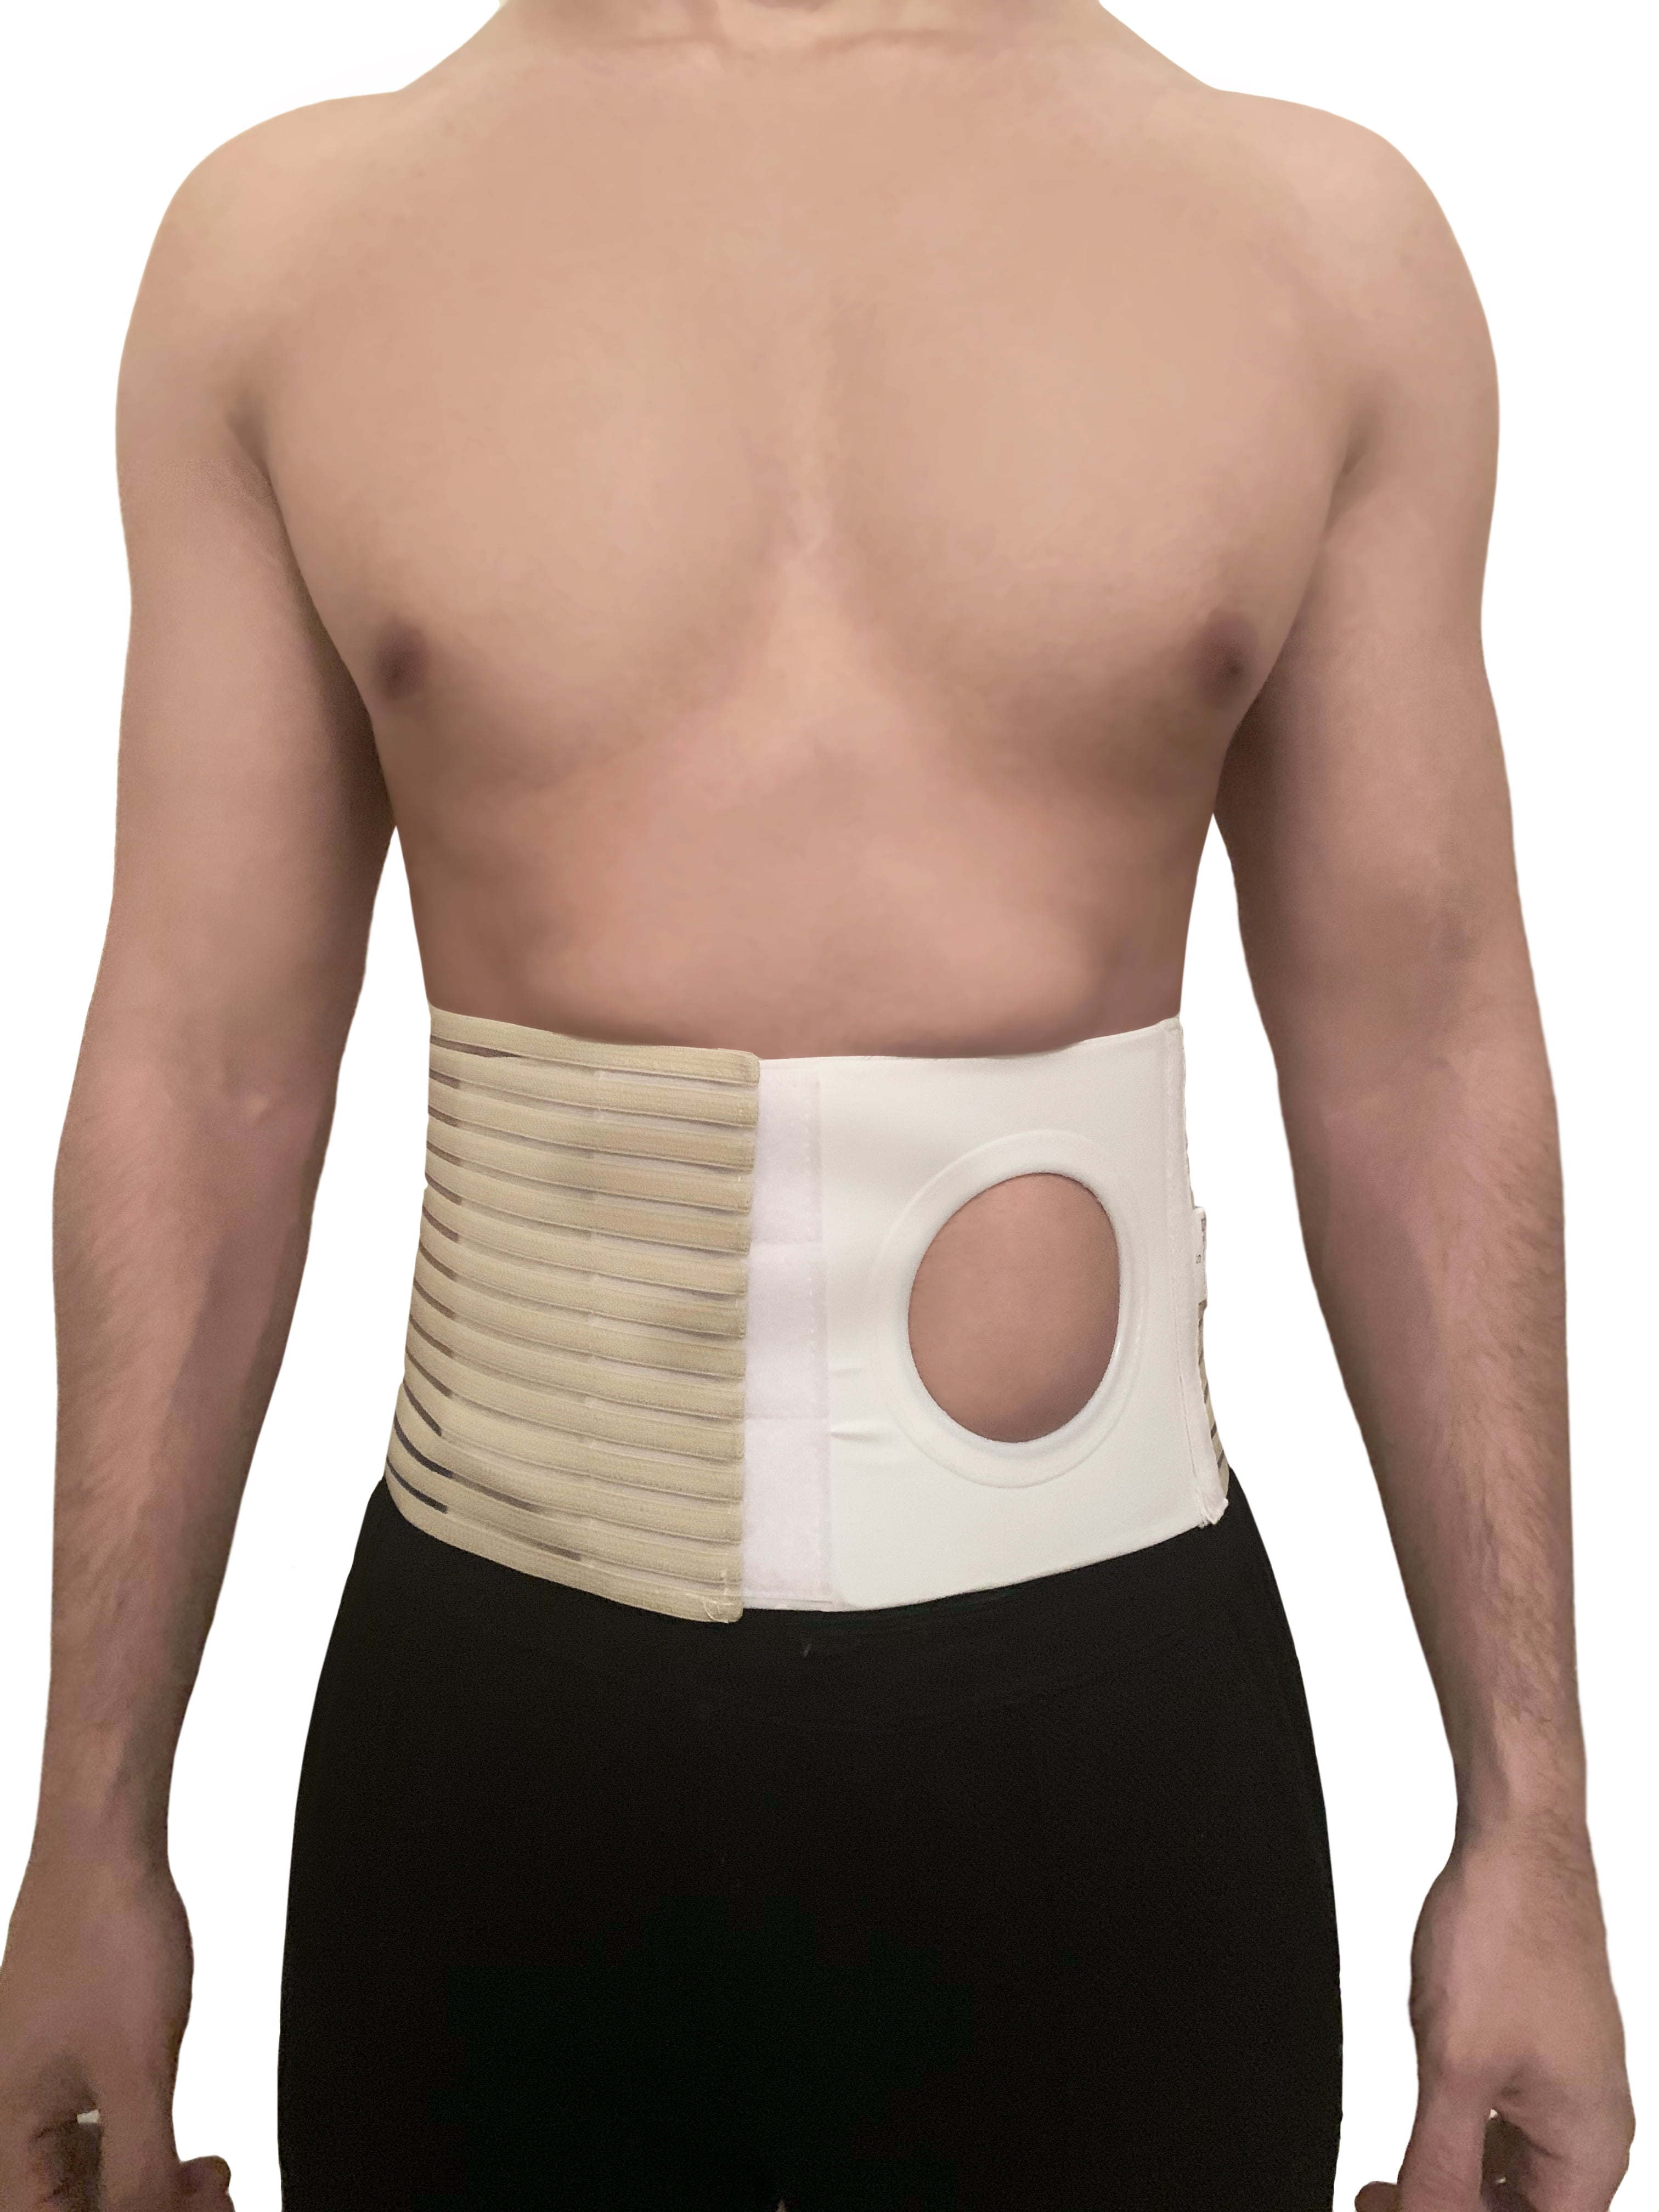 Abdominal Hernia Belt Ostomy Supplies With 314 Ringhole For Post